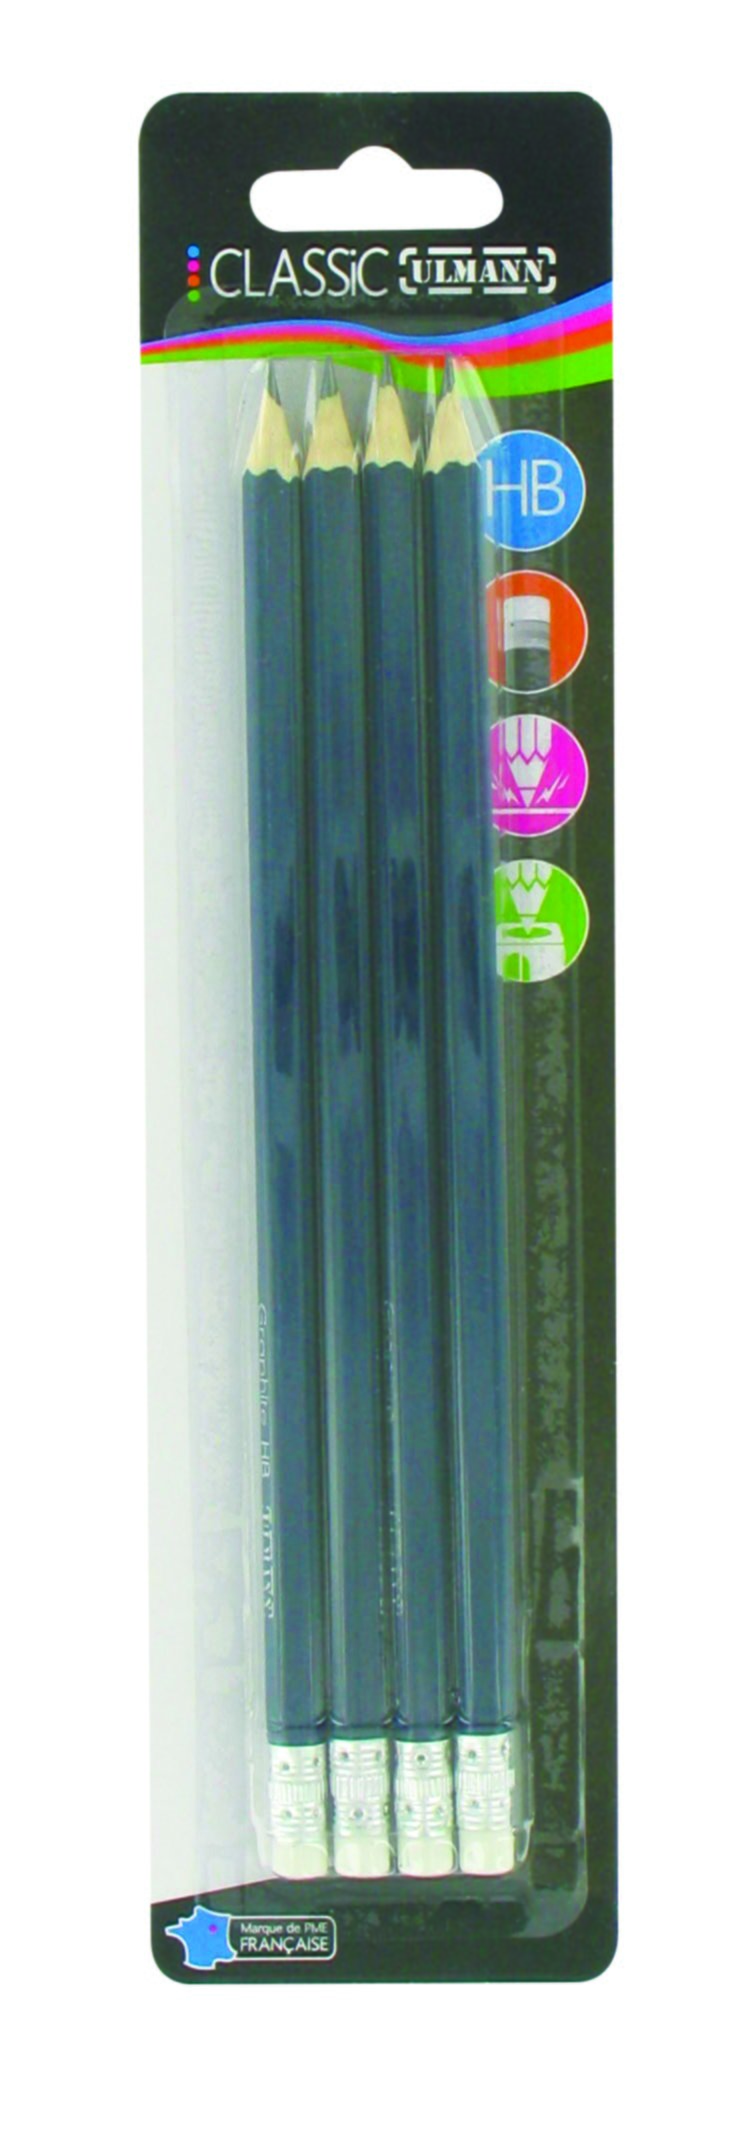 4 crayons graphite HB Classic + bout gomme - ULMANN 